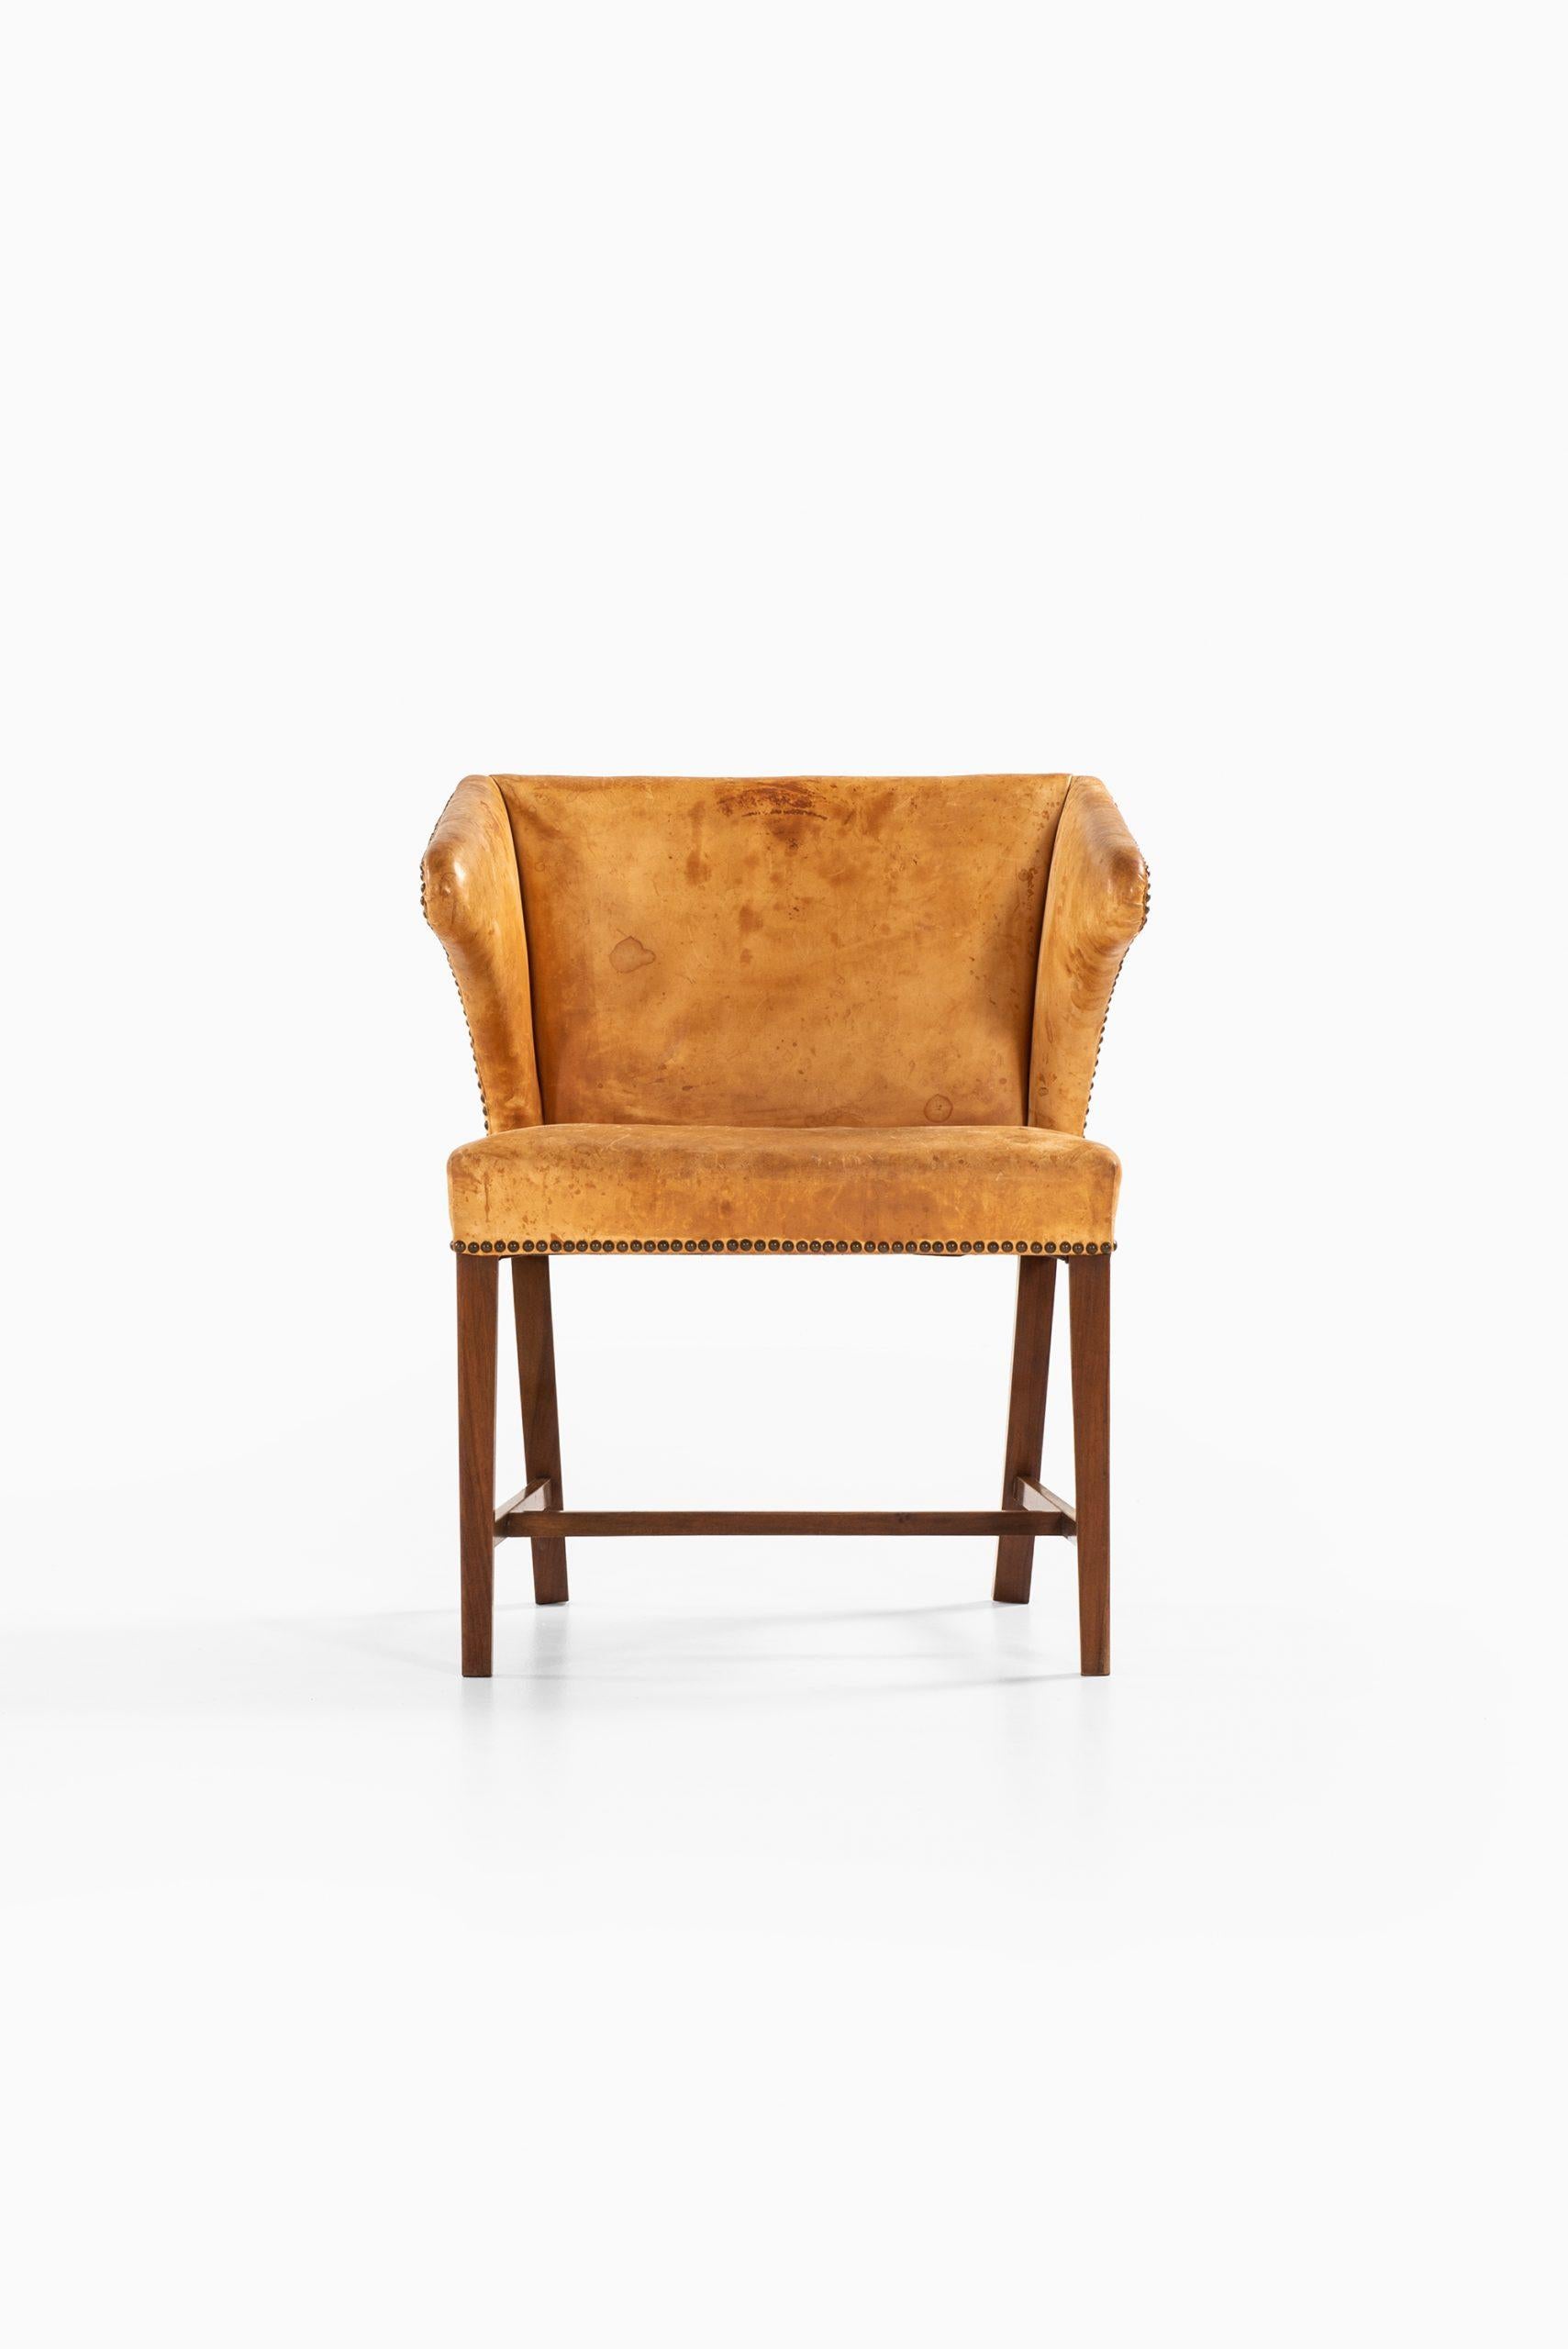 Very rare armchair attributed to Frits Henningsen. Produced by cabinetmaker Frits Henningsen in Denmark.